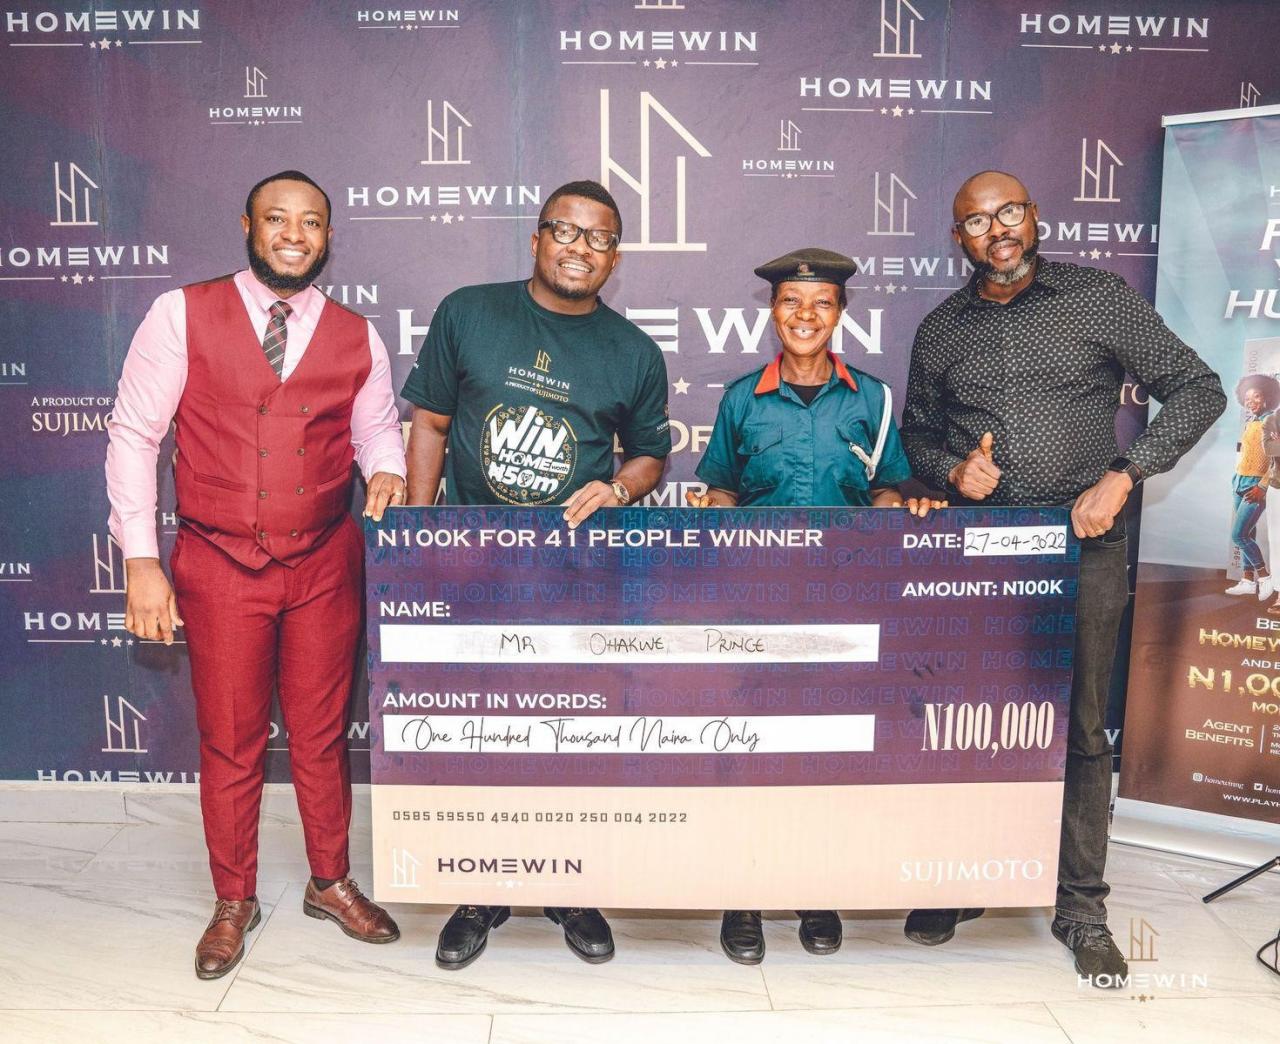 Sujimoto Is Giving Away A 3-Bedroom Fully Furnished Apartment in Lekki-Lagos on July 1st 2022 for Free. Read This Article to Know How to Win